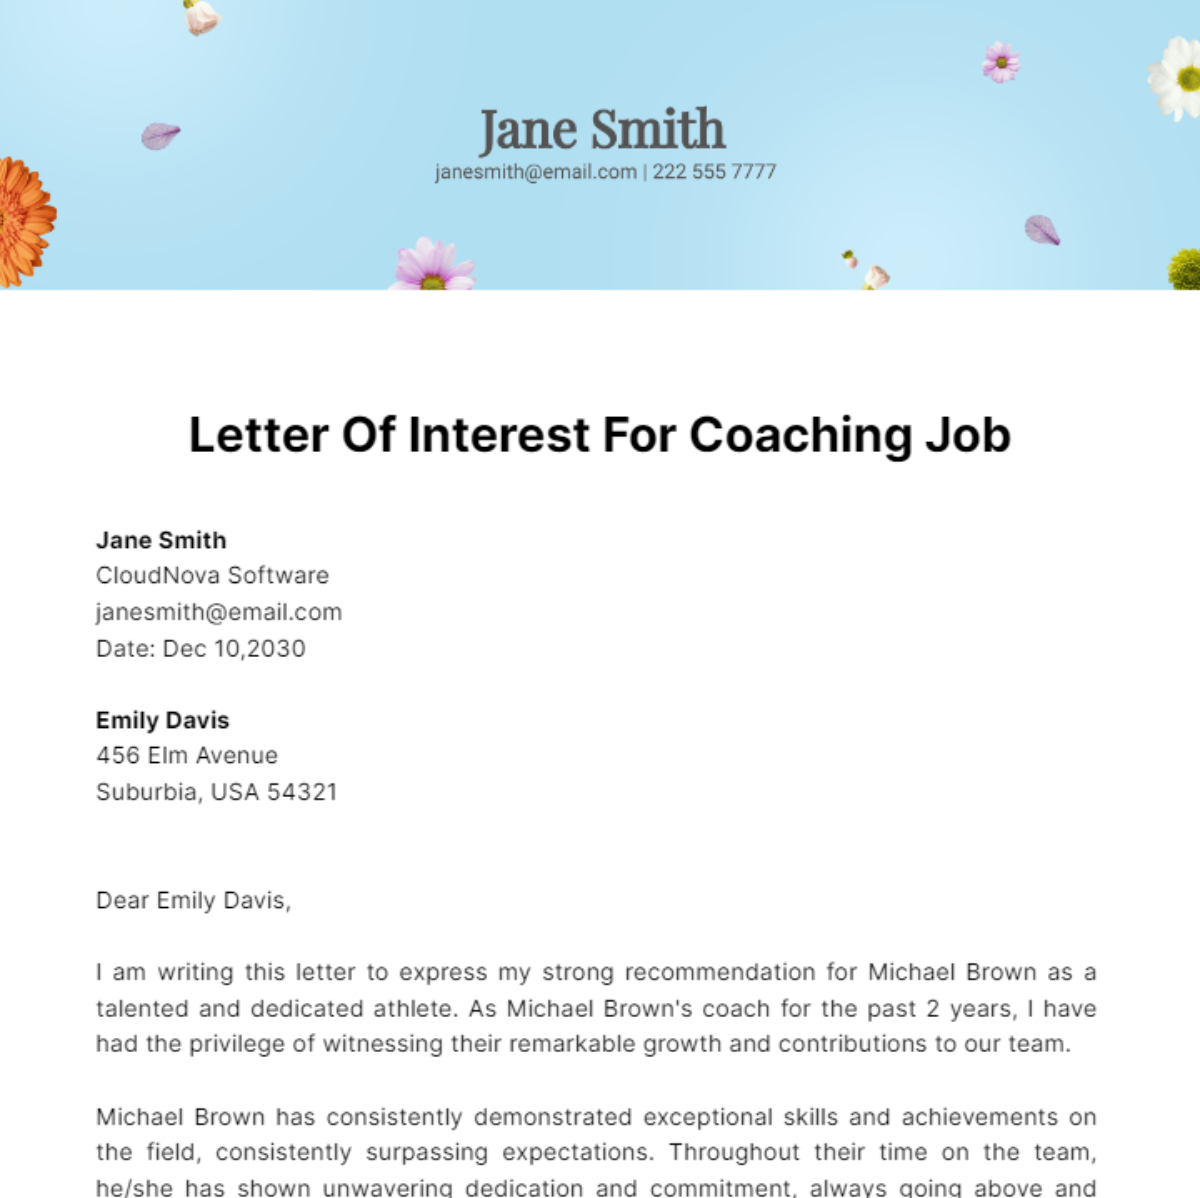 Letter Of Interest For Coaching Job Template